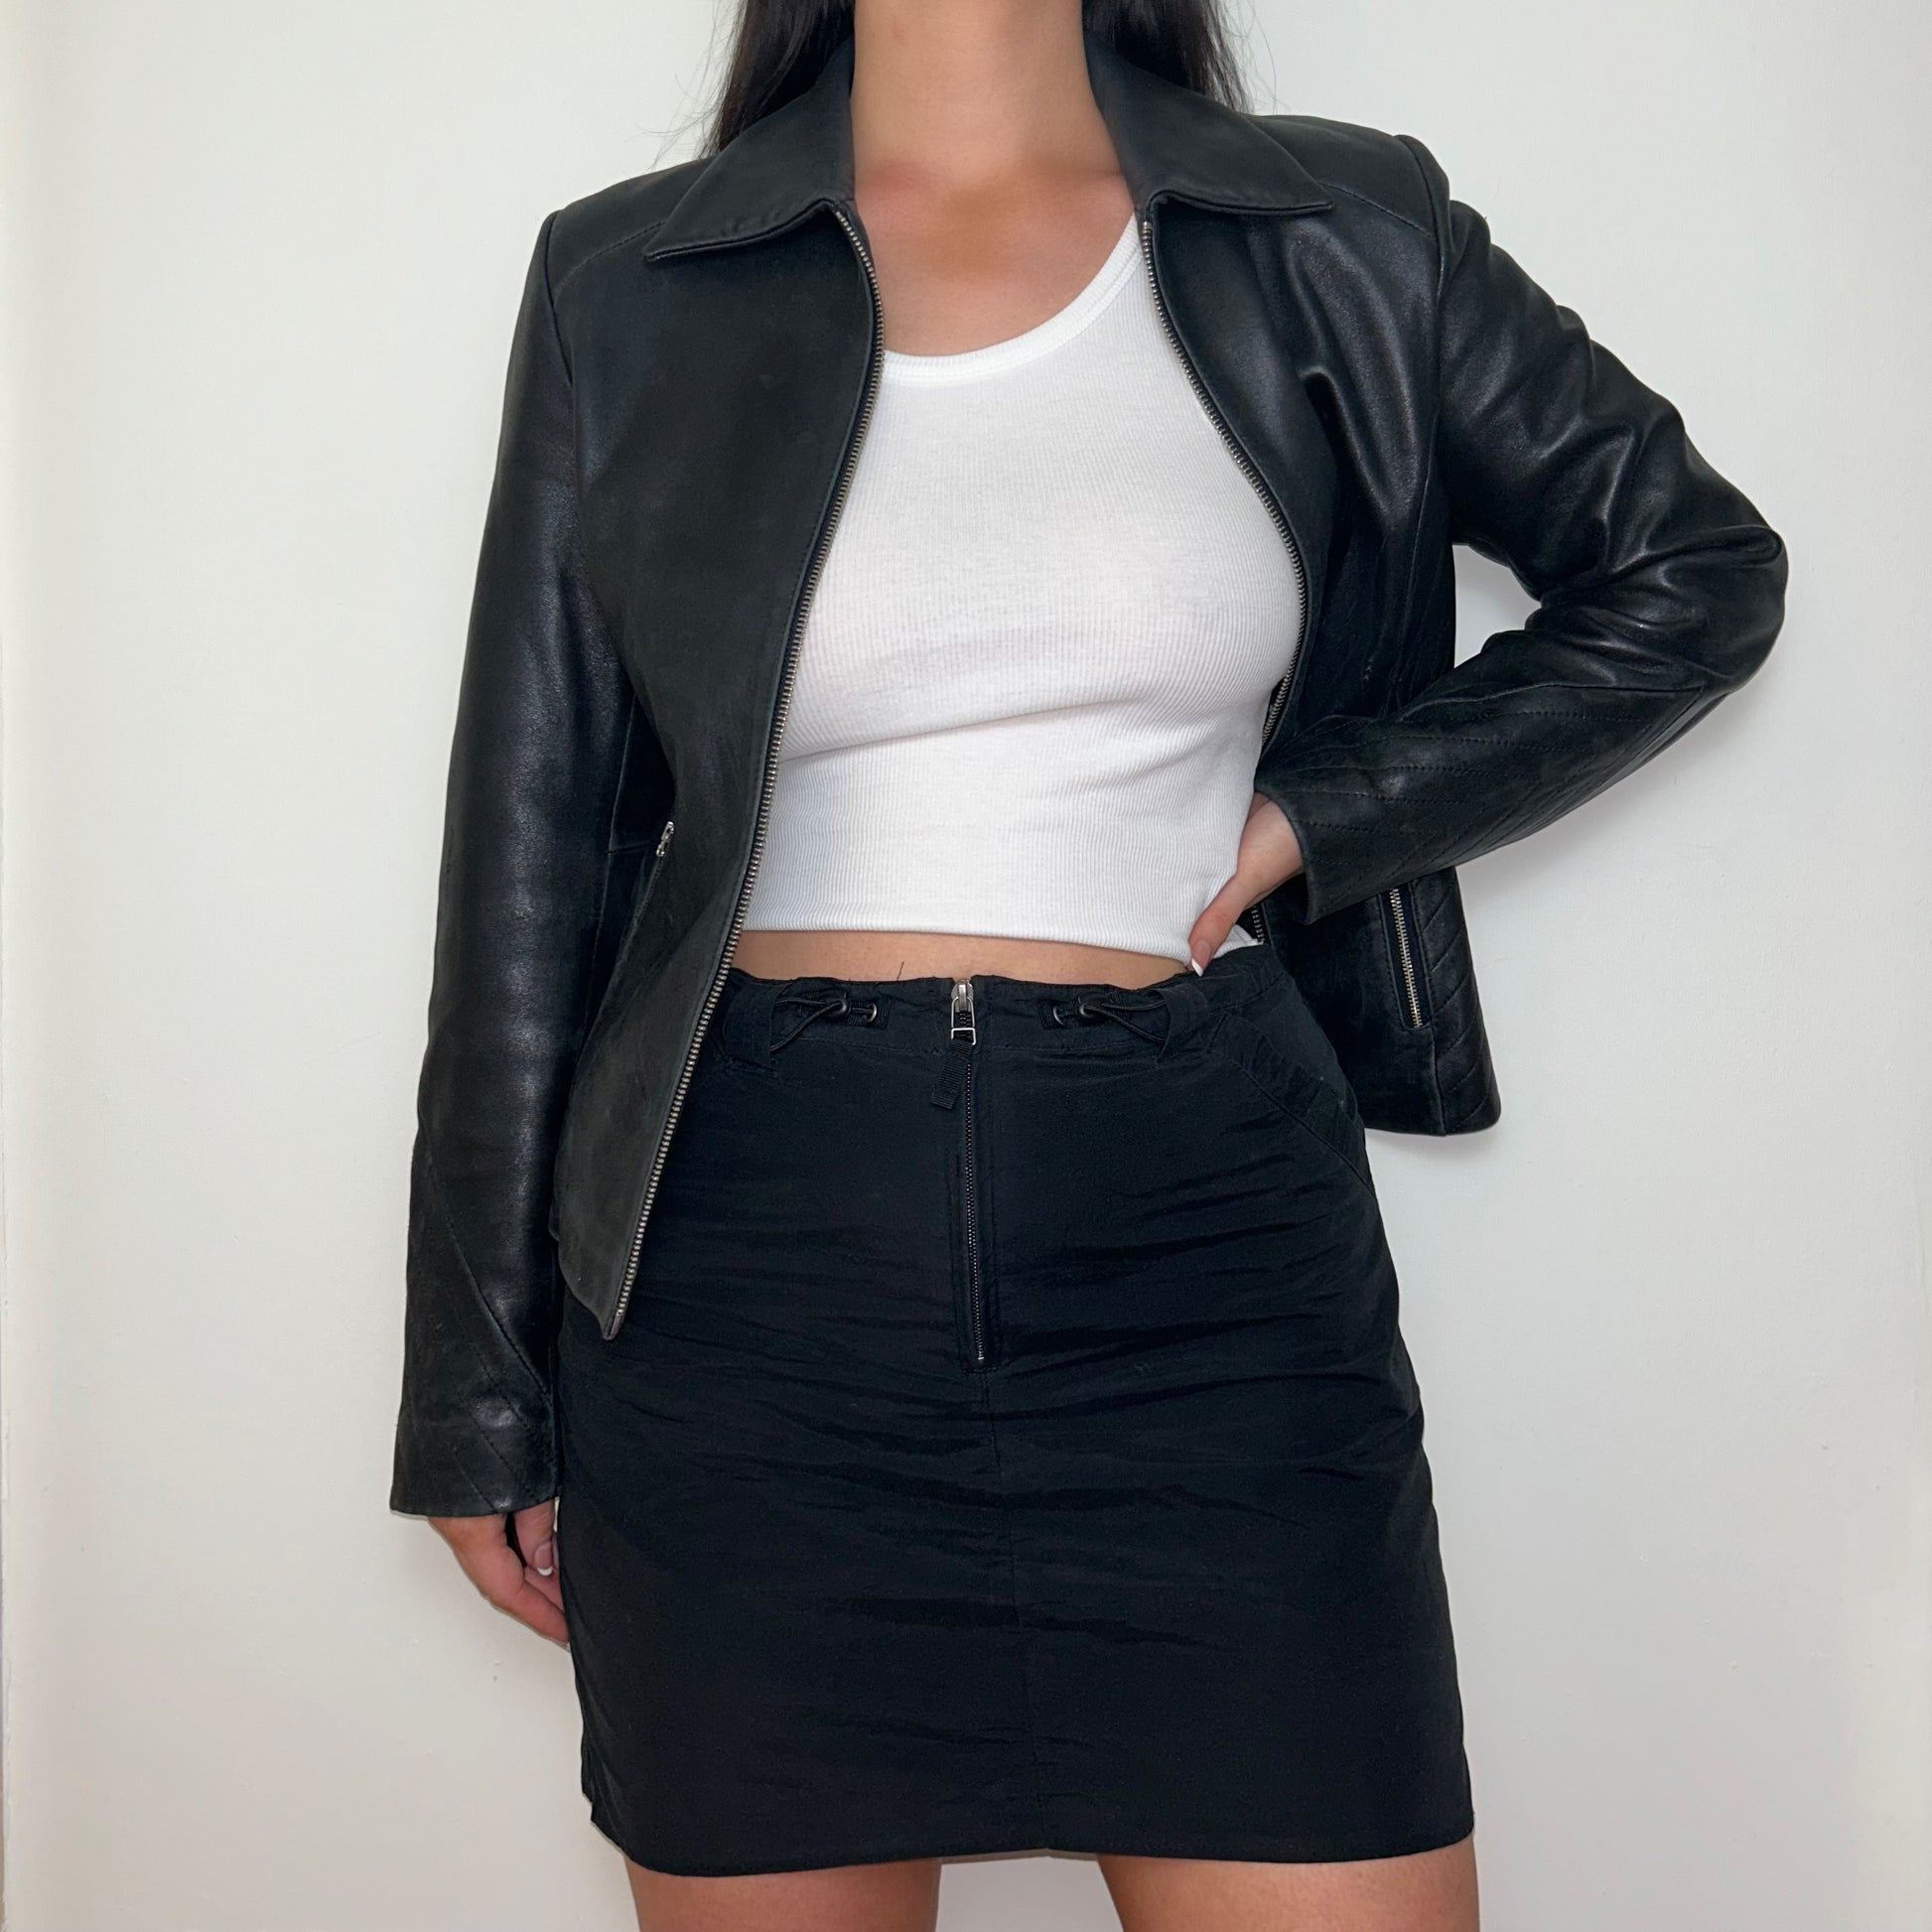 black real leather jacket shown on a model wearing a white crop top and black mini skirt